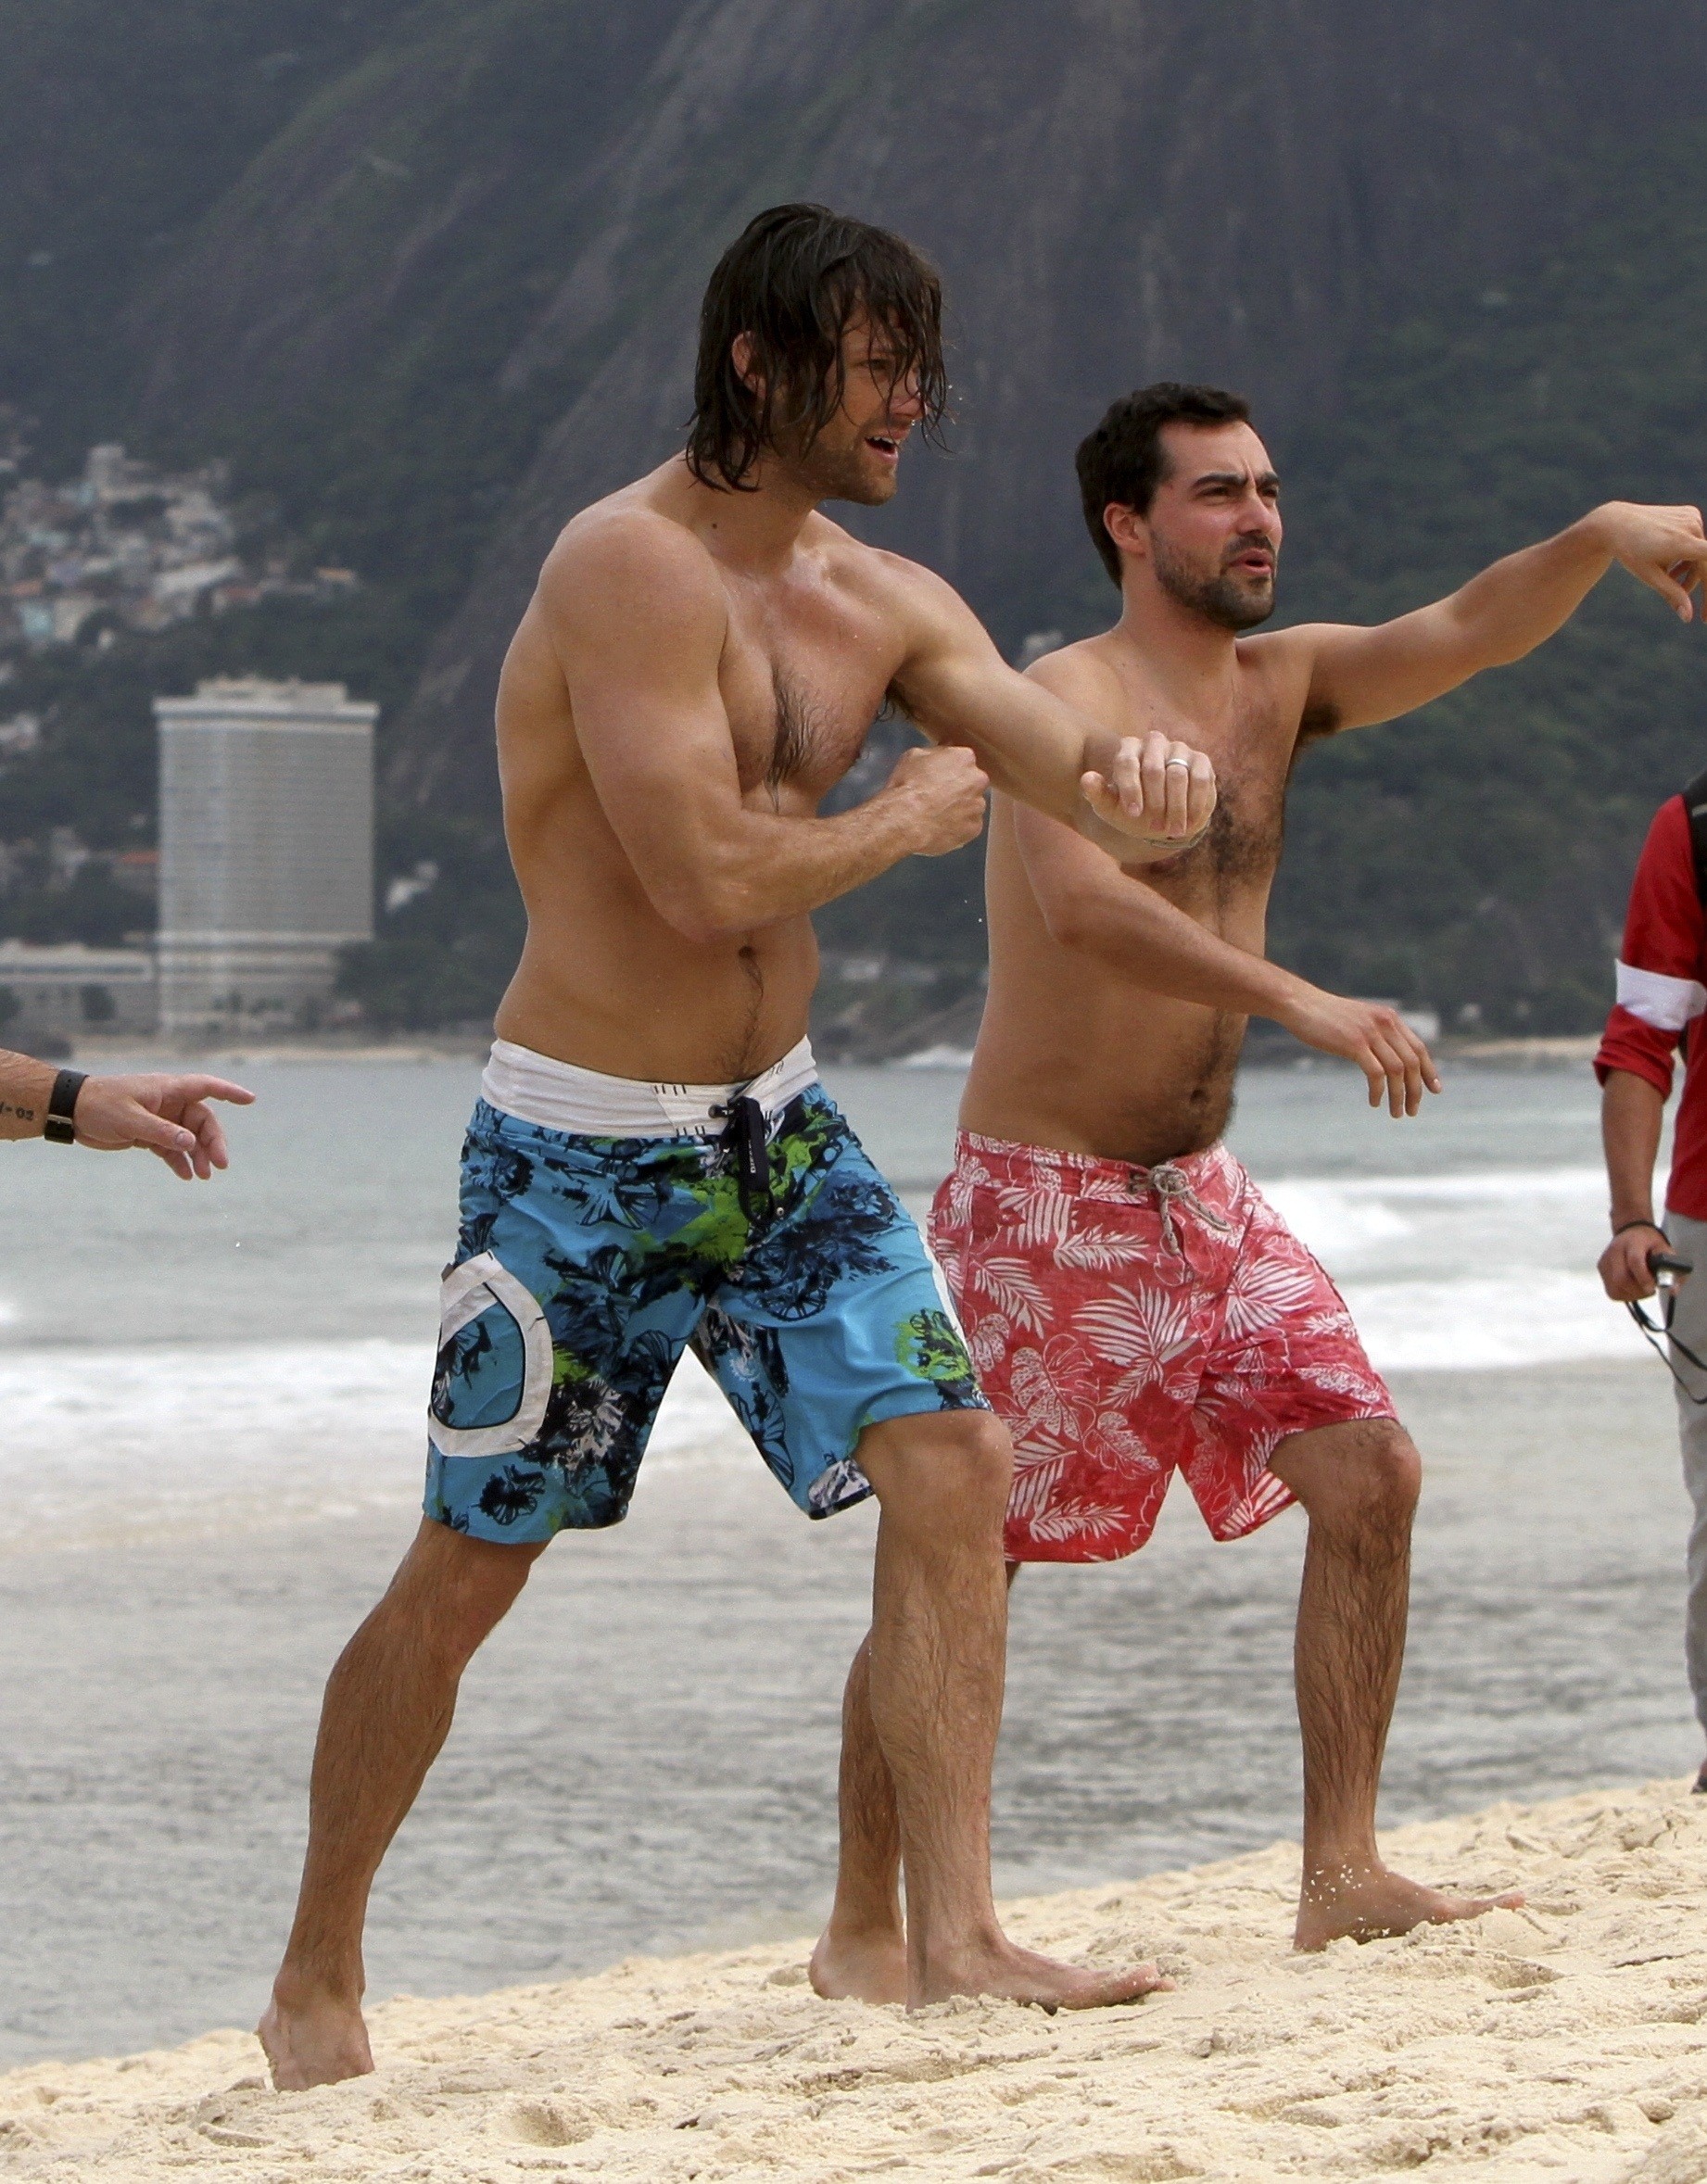 1842x2357 Shirtless at the beach in Rio De Janeiro. HD Wallpaper and background  photos of Jared for fans of jared padalecki and jensen ackles images.